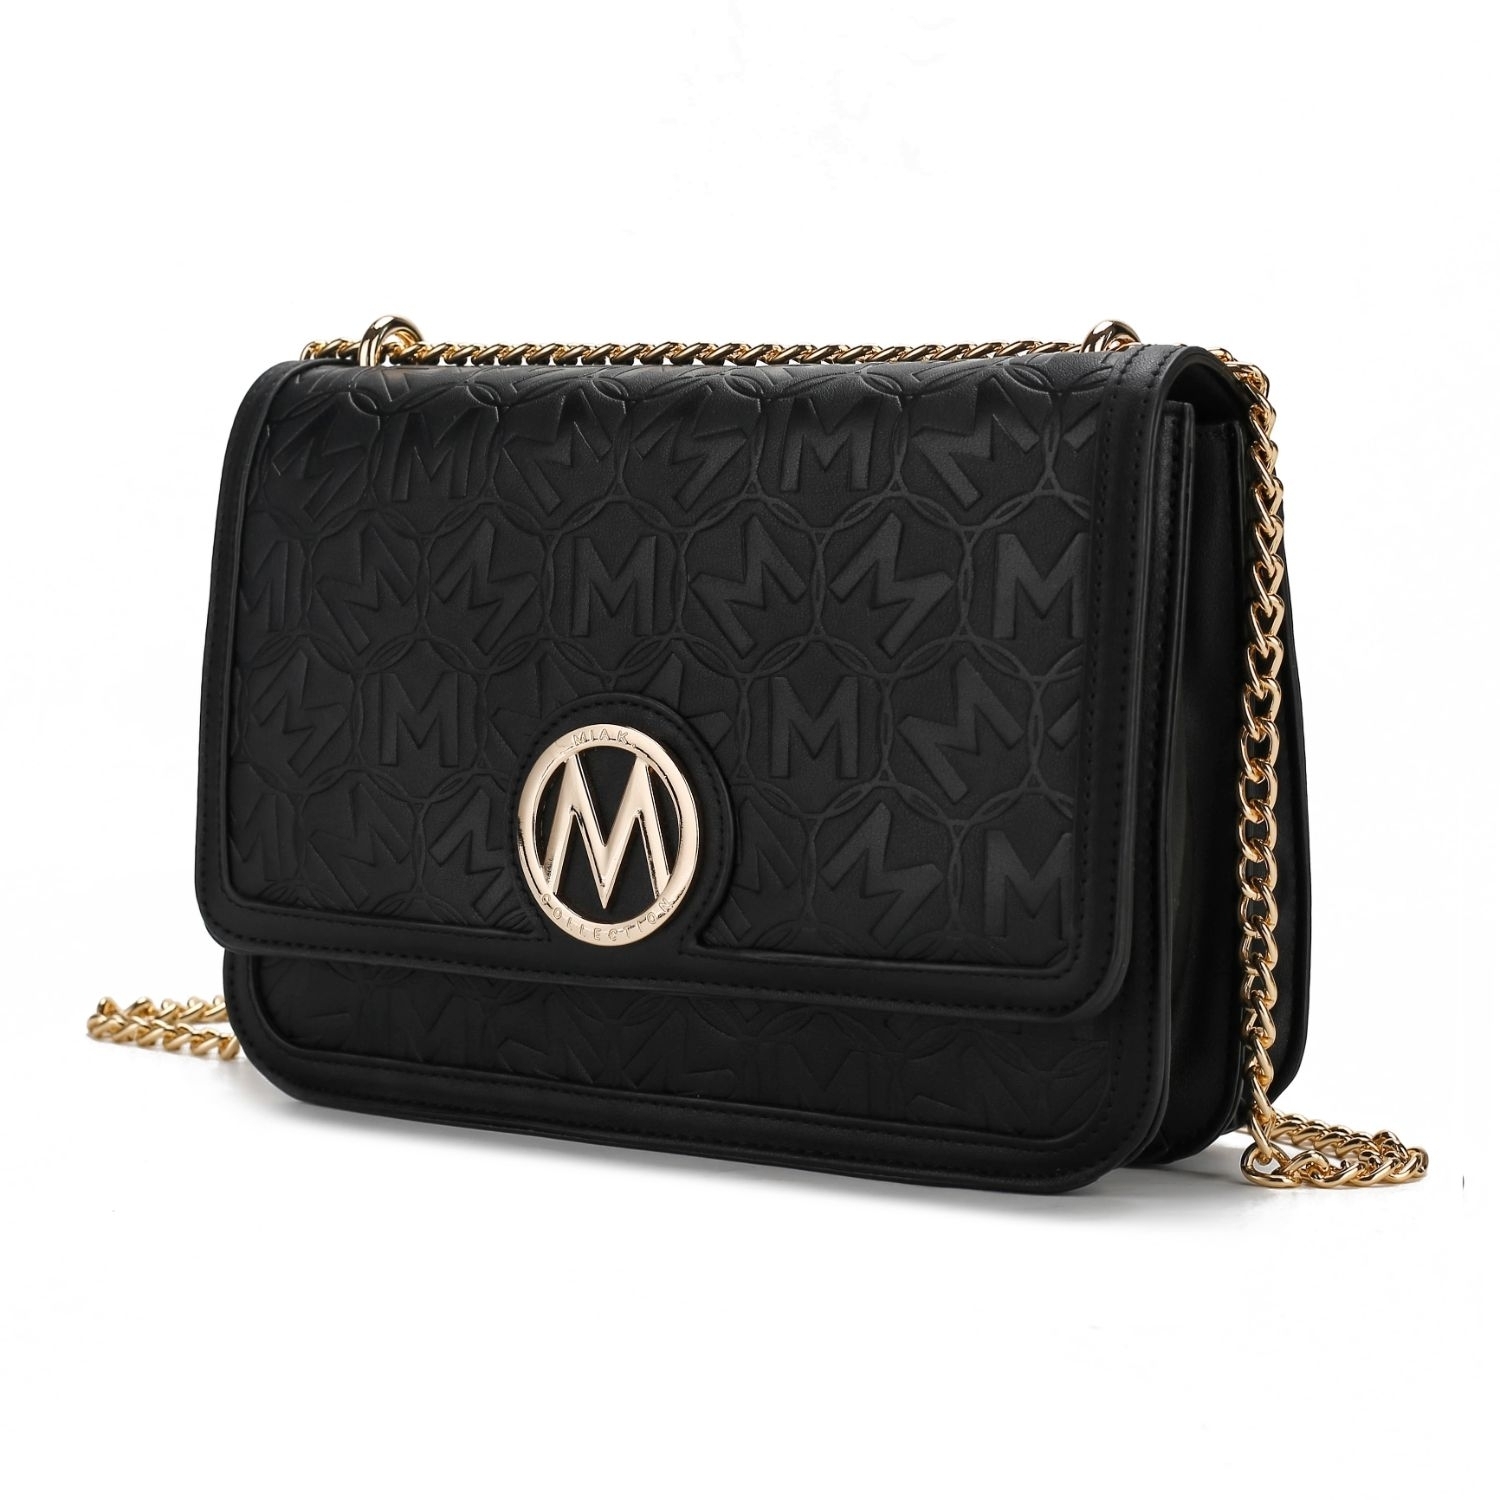 MKF Collection Amiyah Vegan Leather Women's Shoulder Bag By Mia K - Navy